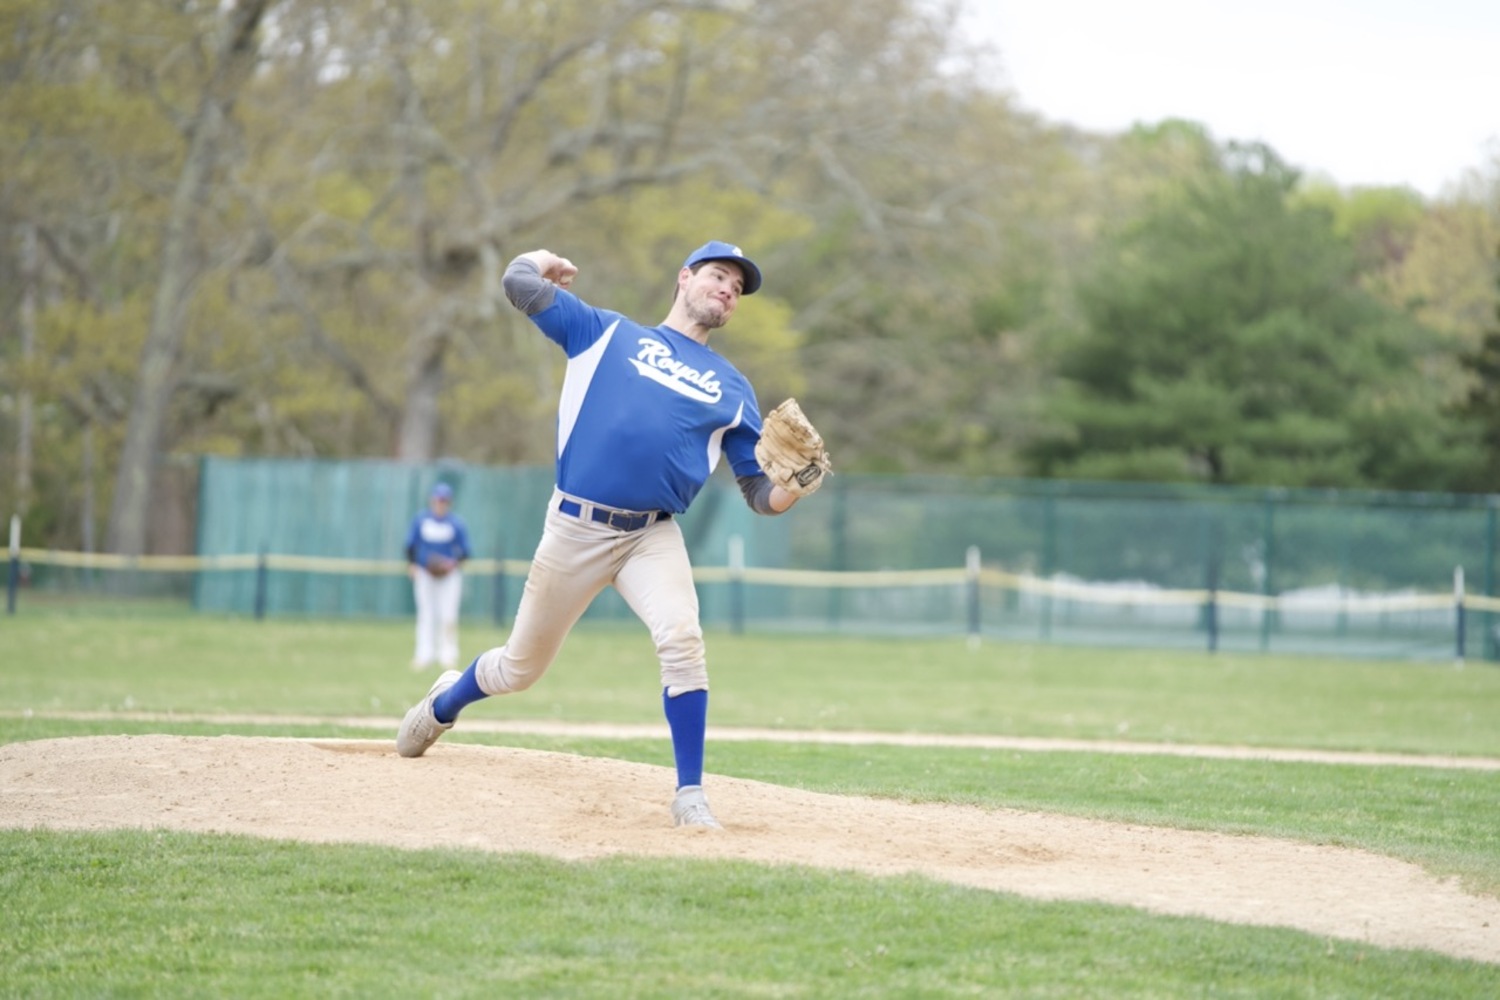 Hamptons Adult Hardball concluded its 2023 season on Sunday morning when the Harbor Kraken took on the Sag Harbor Royals in game three of the championship. The Royals won, 8-6.   HAMPTONS ADULT HARDBALL